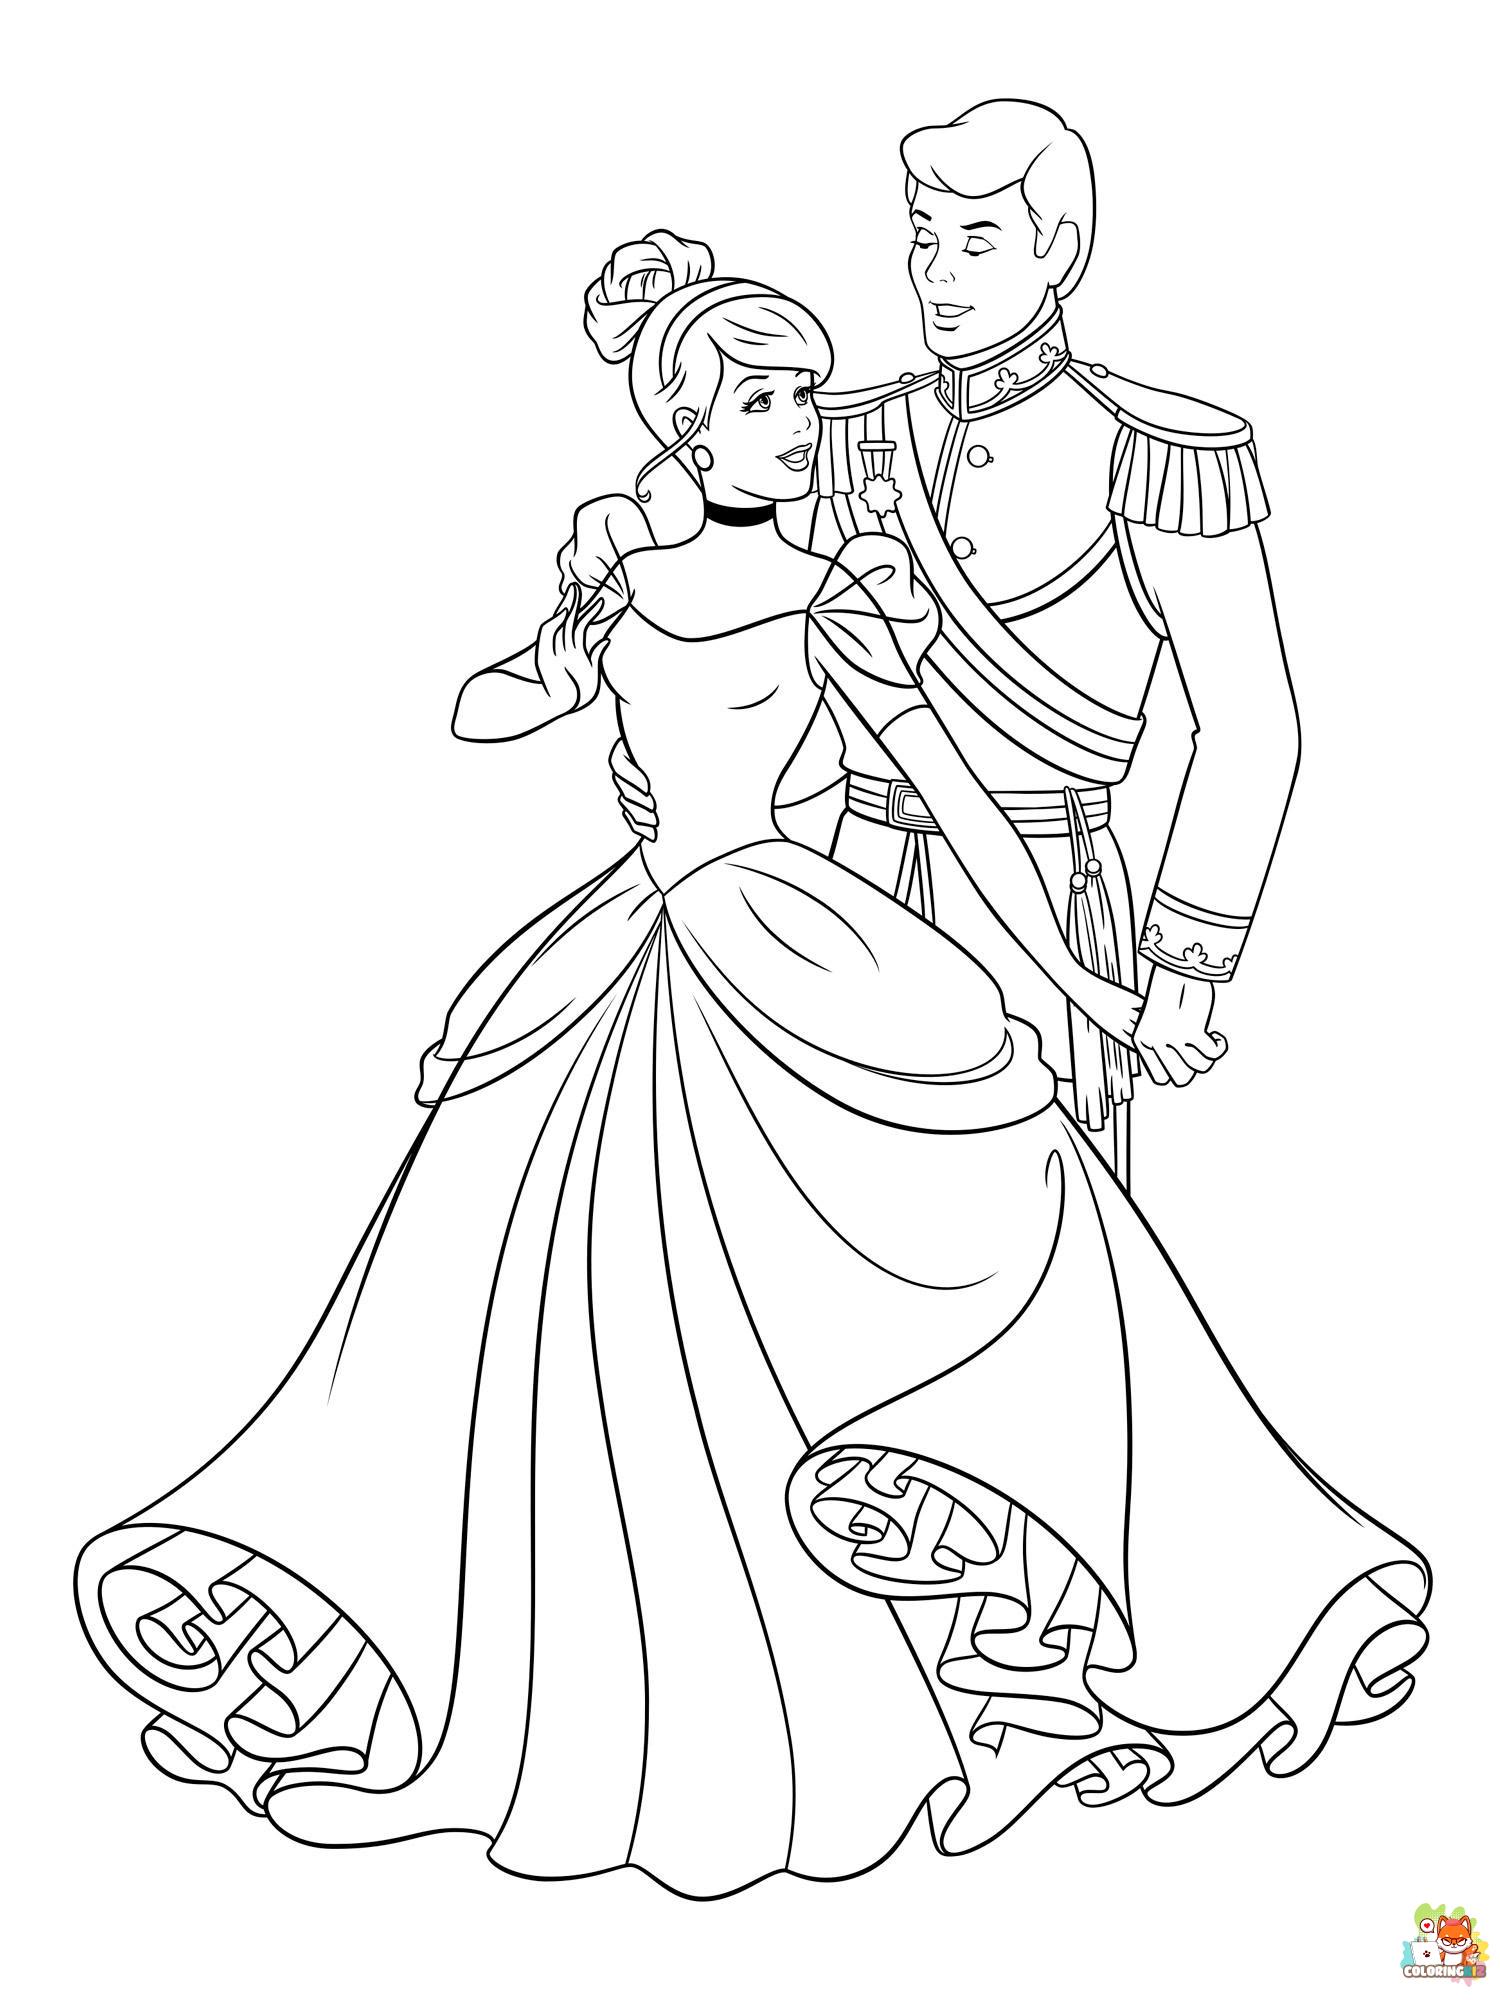 Cinderella with Prince Charming Coloring Pages 8